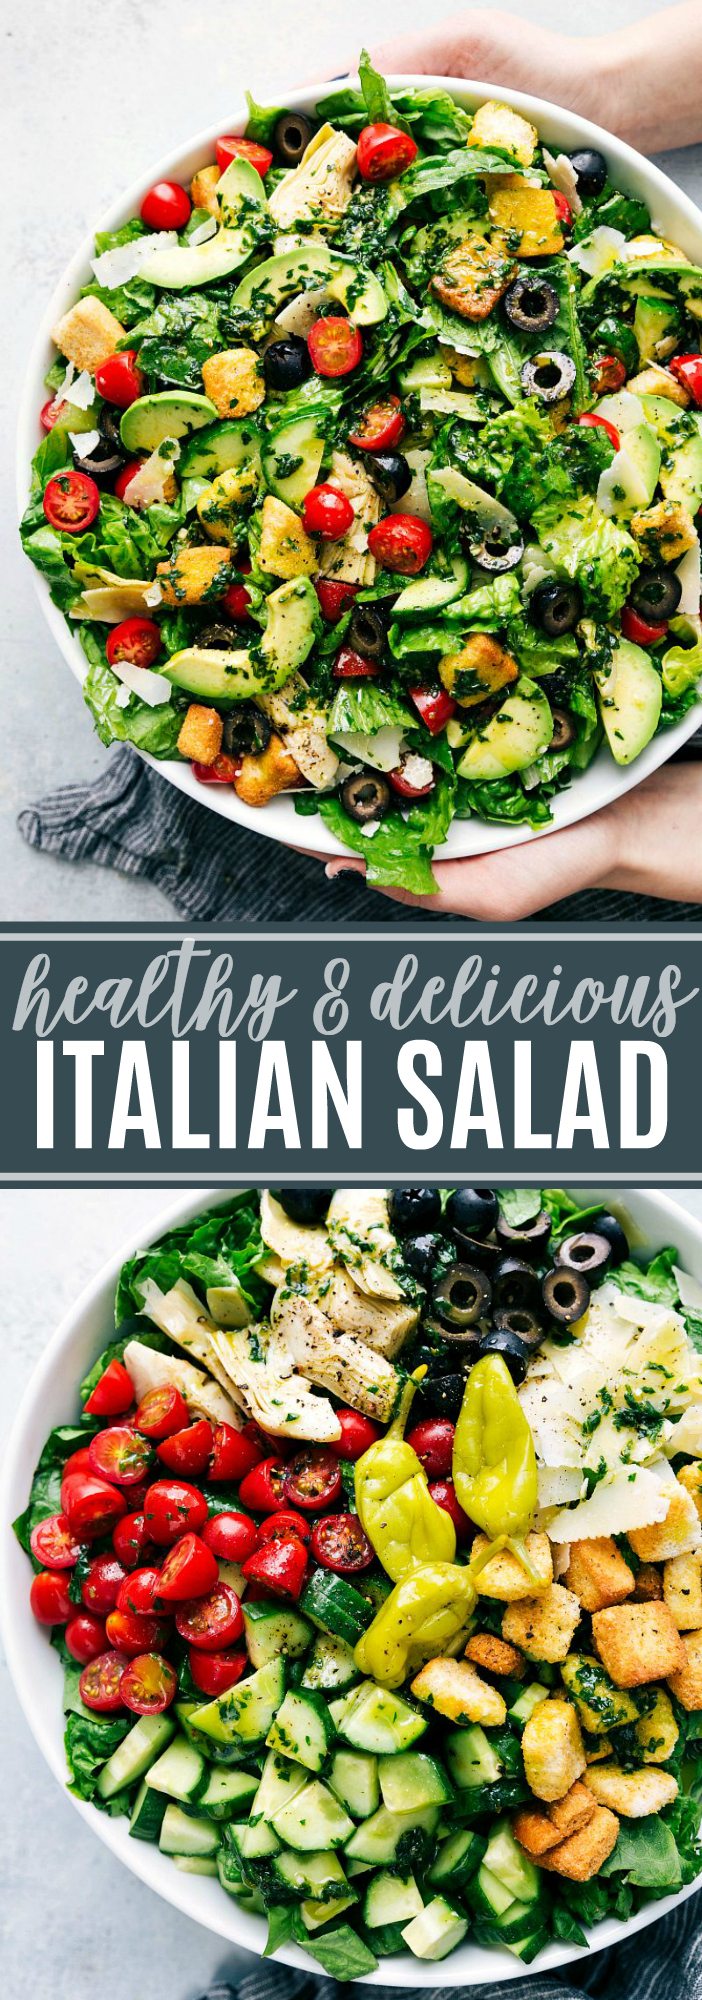 The ultimate BEST EVER Italian Salad with a healthy herb-packed dressing! via chelseasmessyapron.com #italian #salad #green #salad #easy #healthy #best #ever #quick #meal #dinner #croutons #artichoke #tomato #avocado #easy